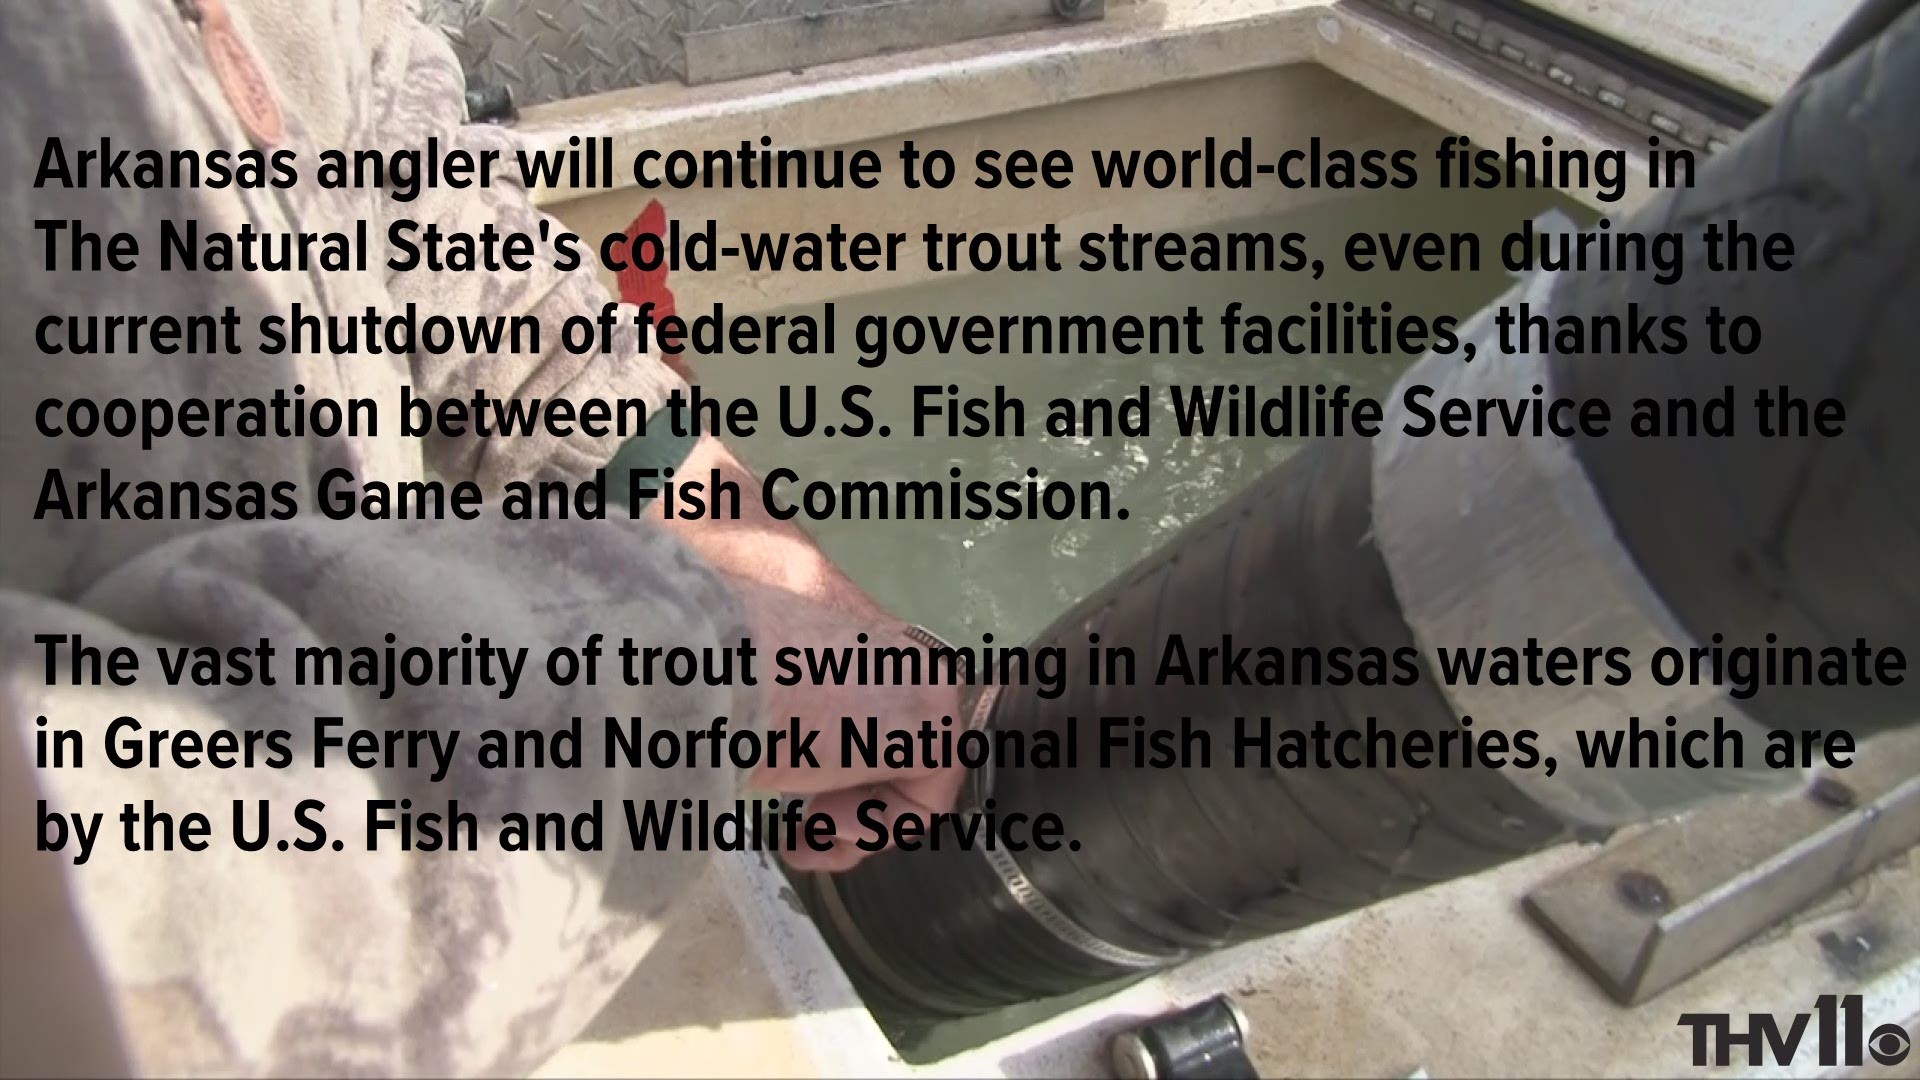 Arkansas anglers will continue to see world-class fishing in The Natural State’s cold-water trout streams, even during the current shutdown of federal government facilities, thanks to cooperation between the U.S. Fish and Wildlife Service and the Arkansas Game and Fish Commission.